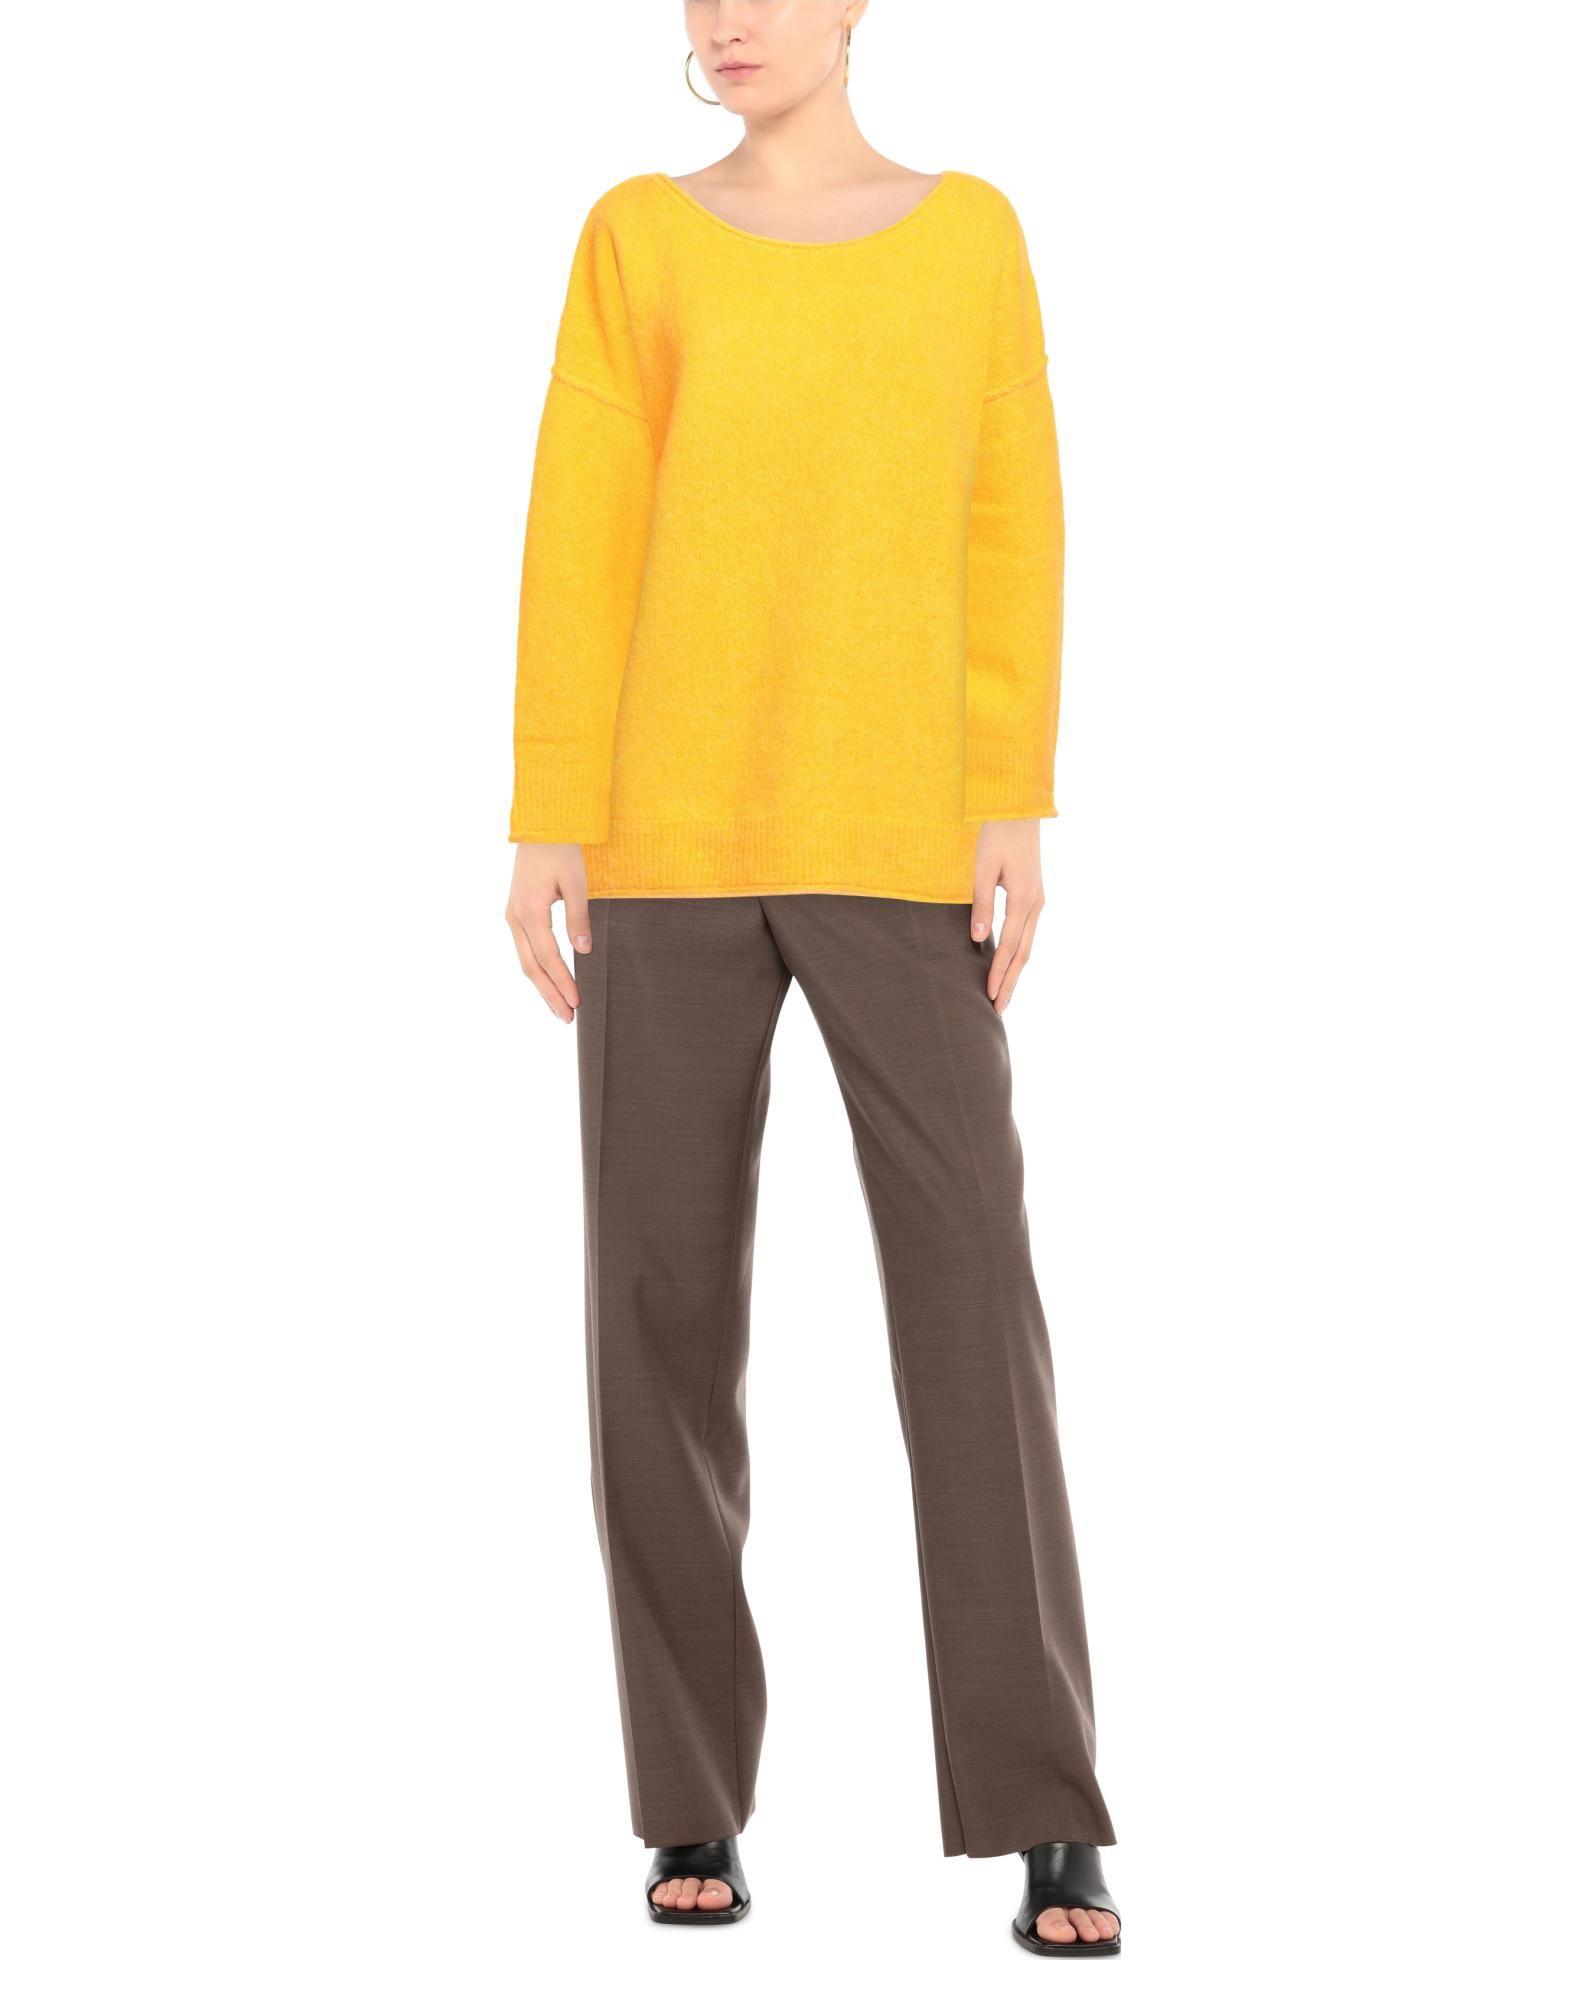 American Vintage Sweater in Yellow | Lyst UK